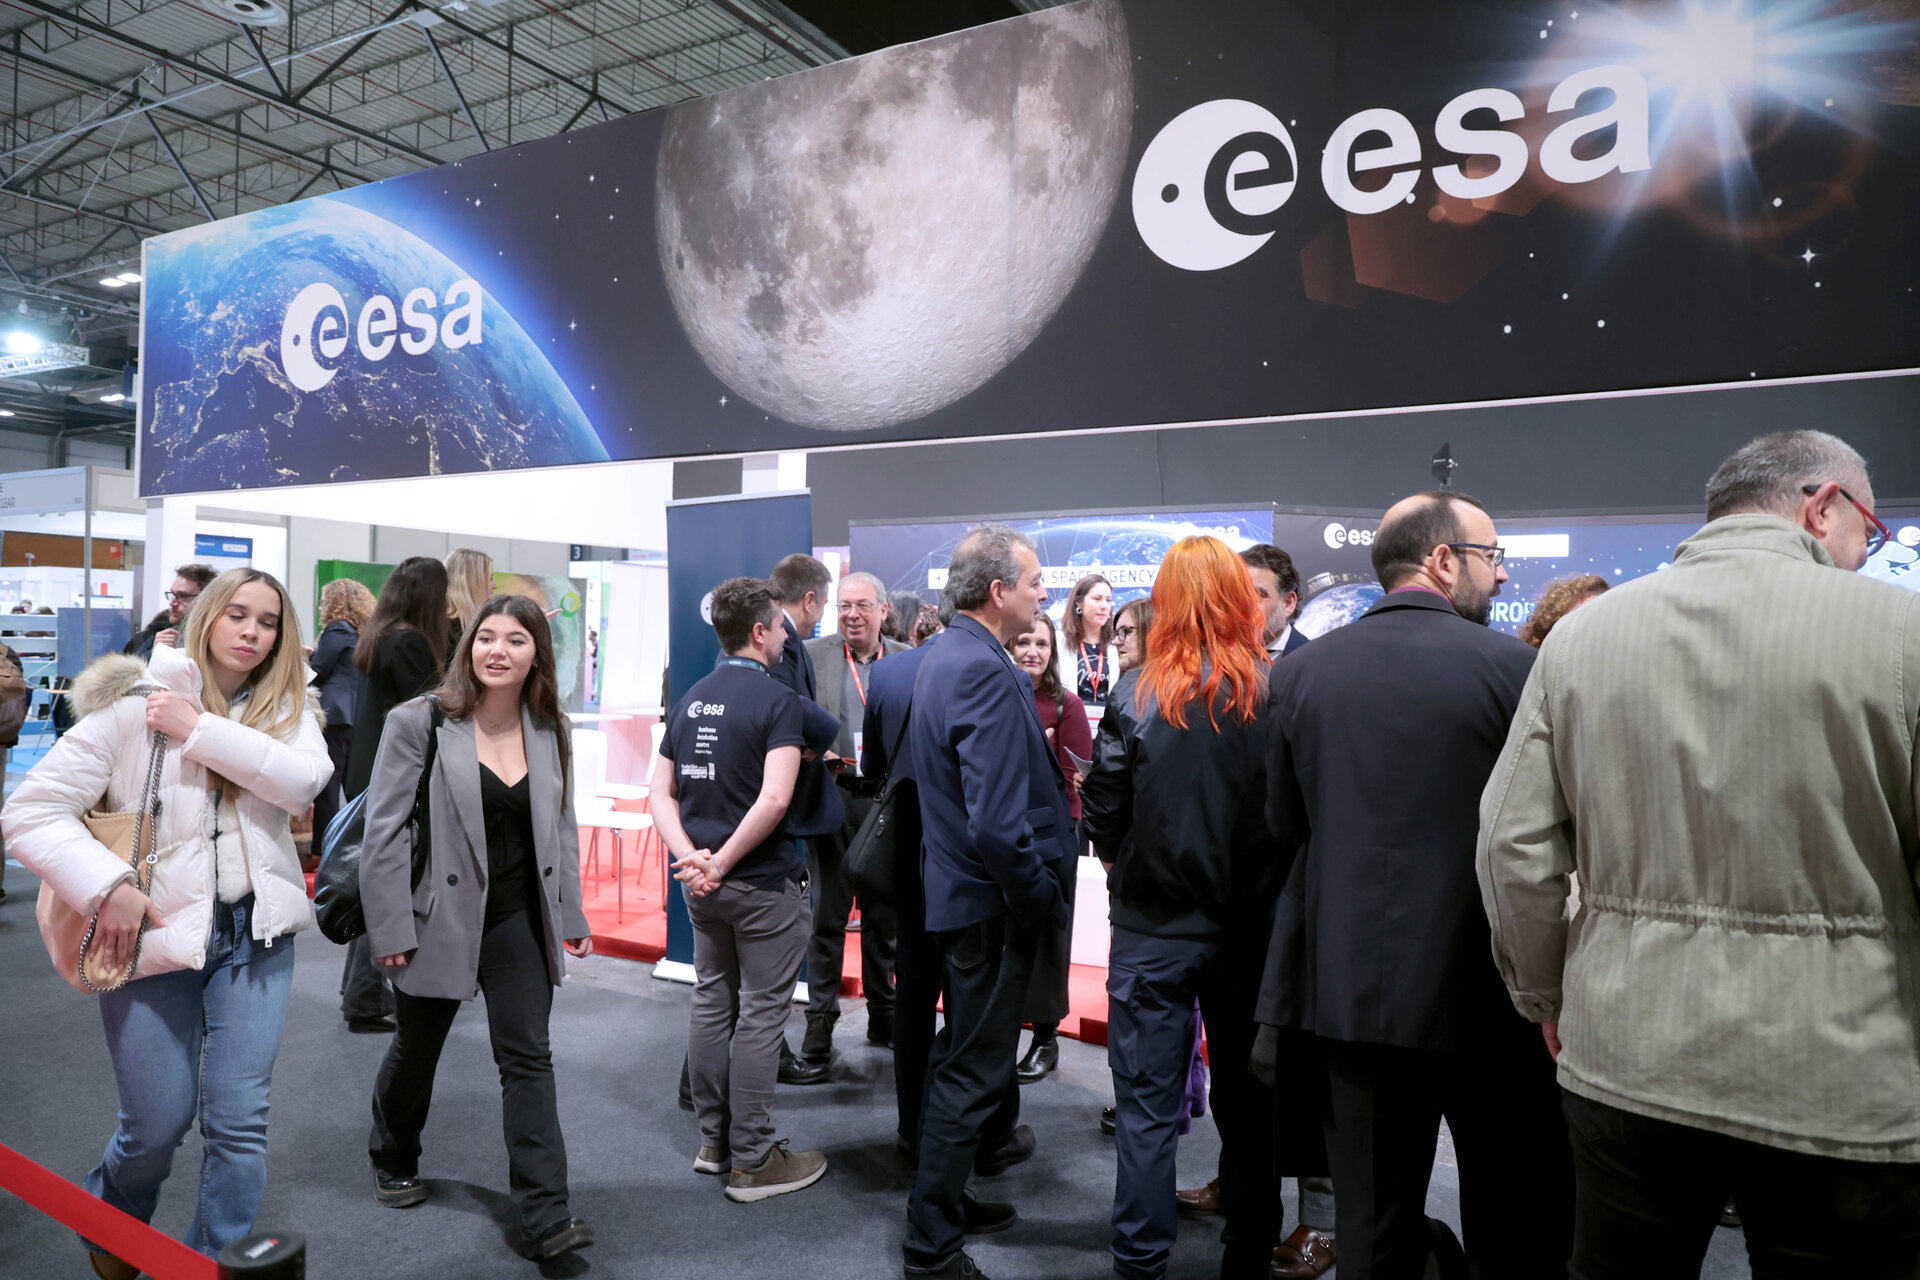 The event concluded with an informal get-together at the ESA stand, providing an ideal setting for fostering networking opportunities.